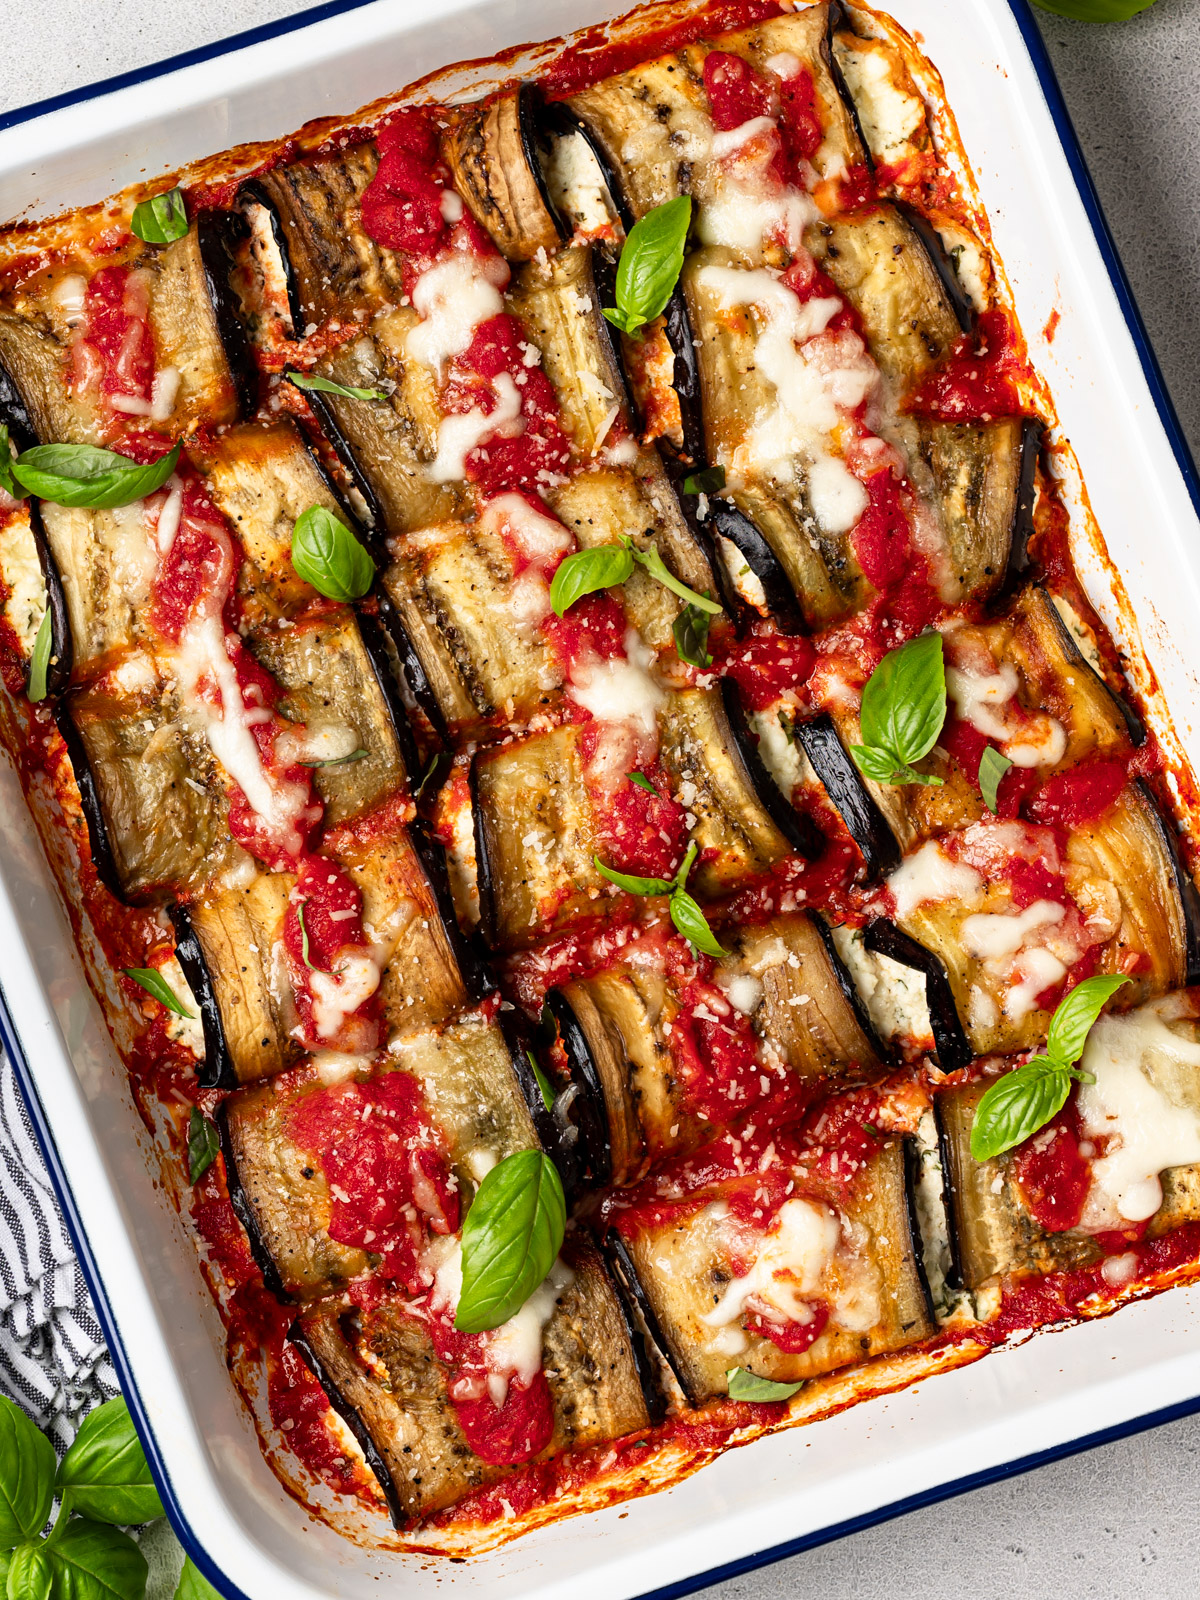 A casserole of baked eggplant rollatini garnished with fresh basil leaves